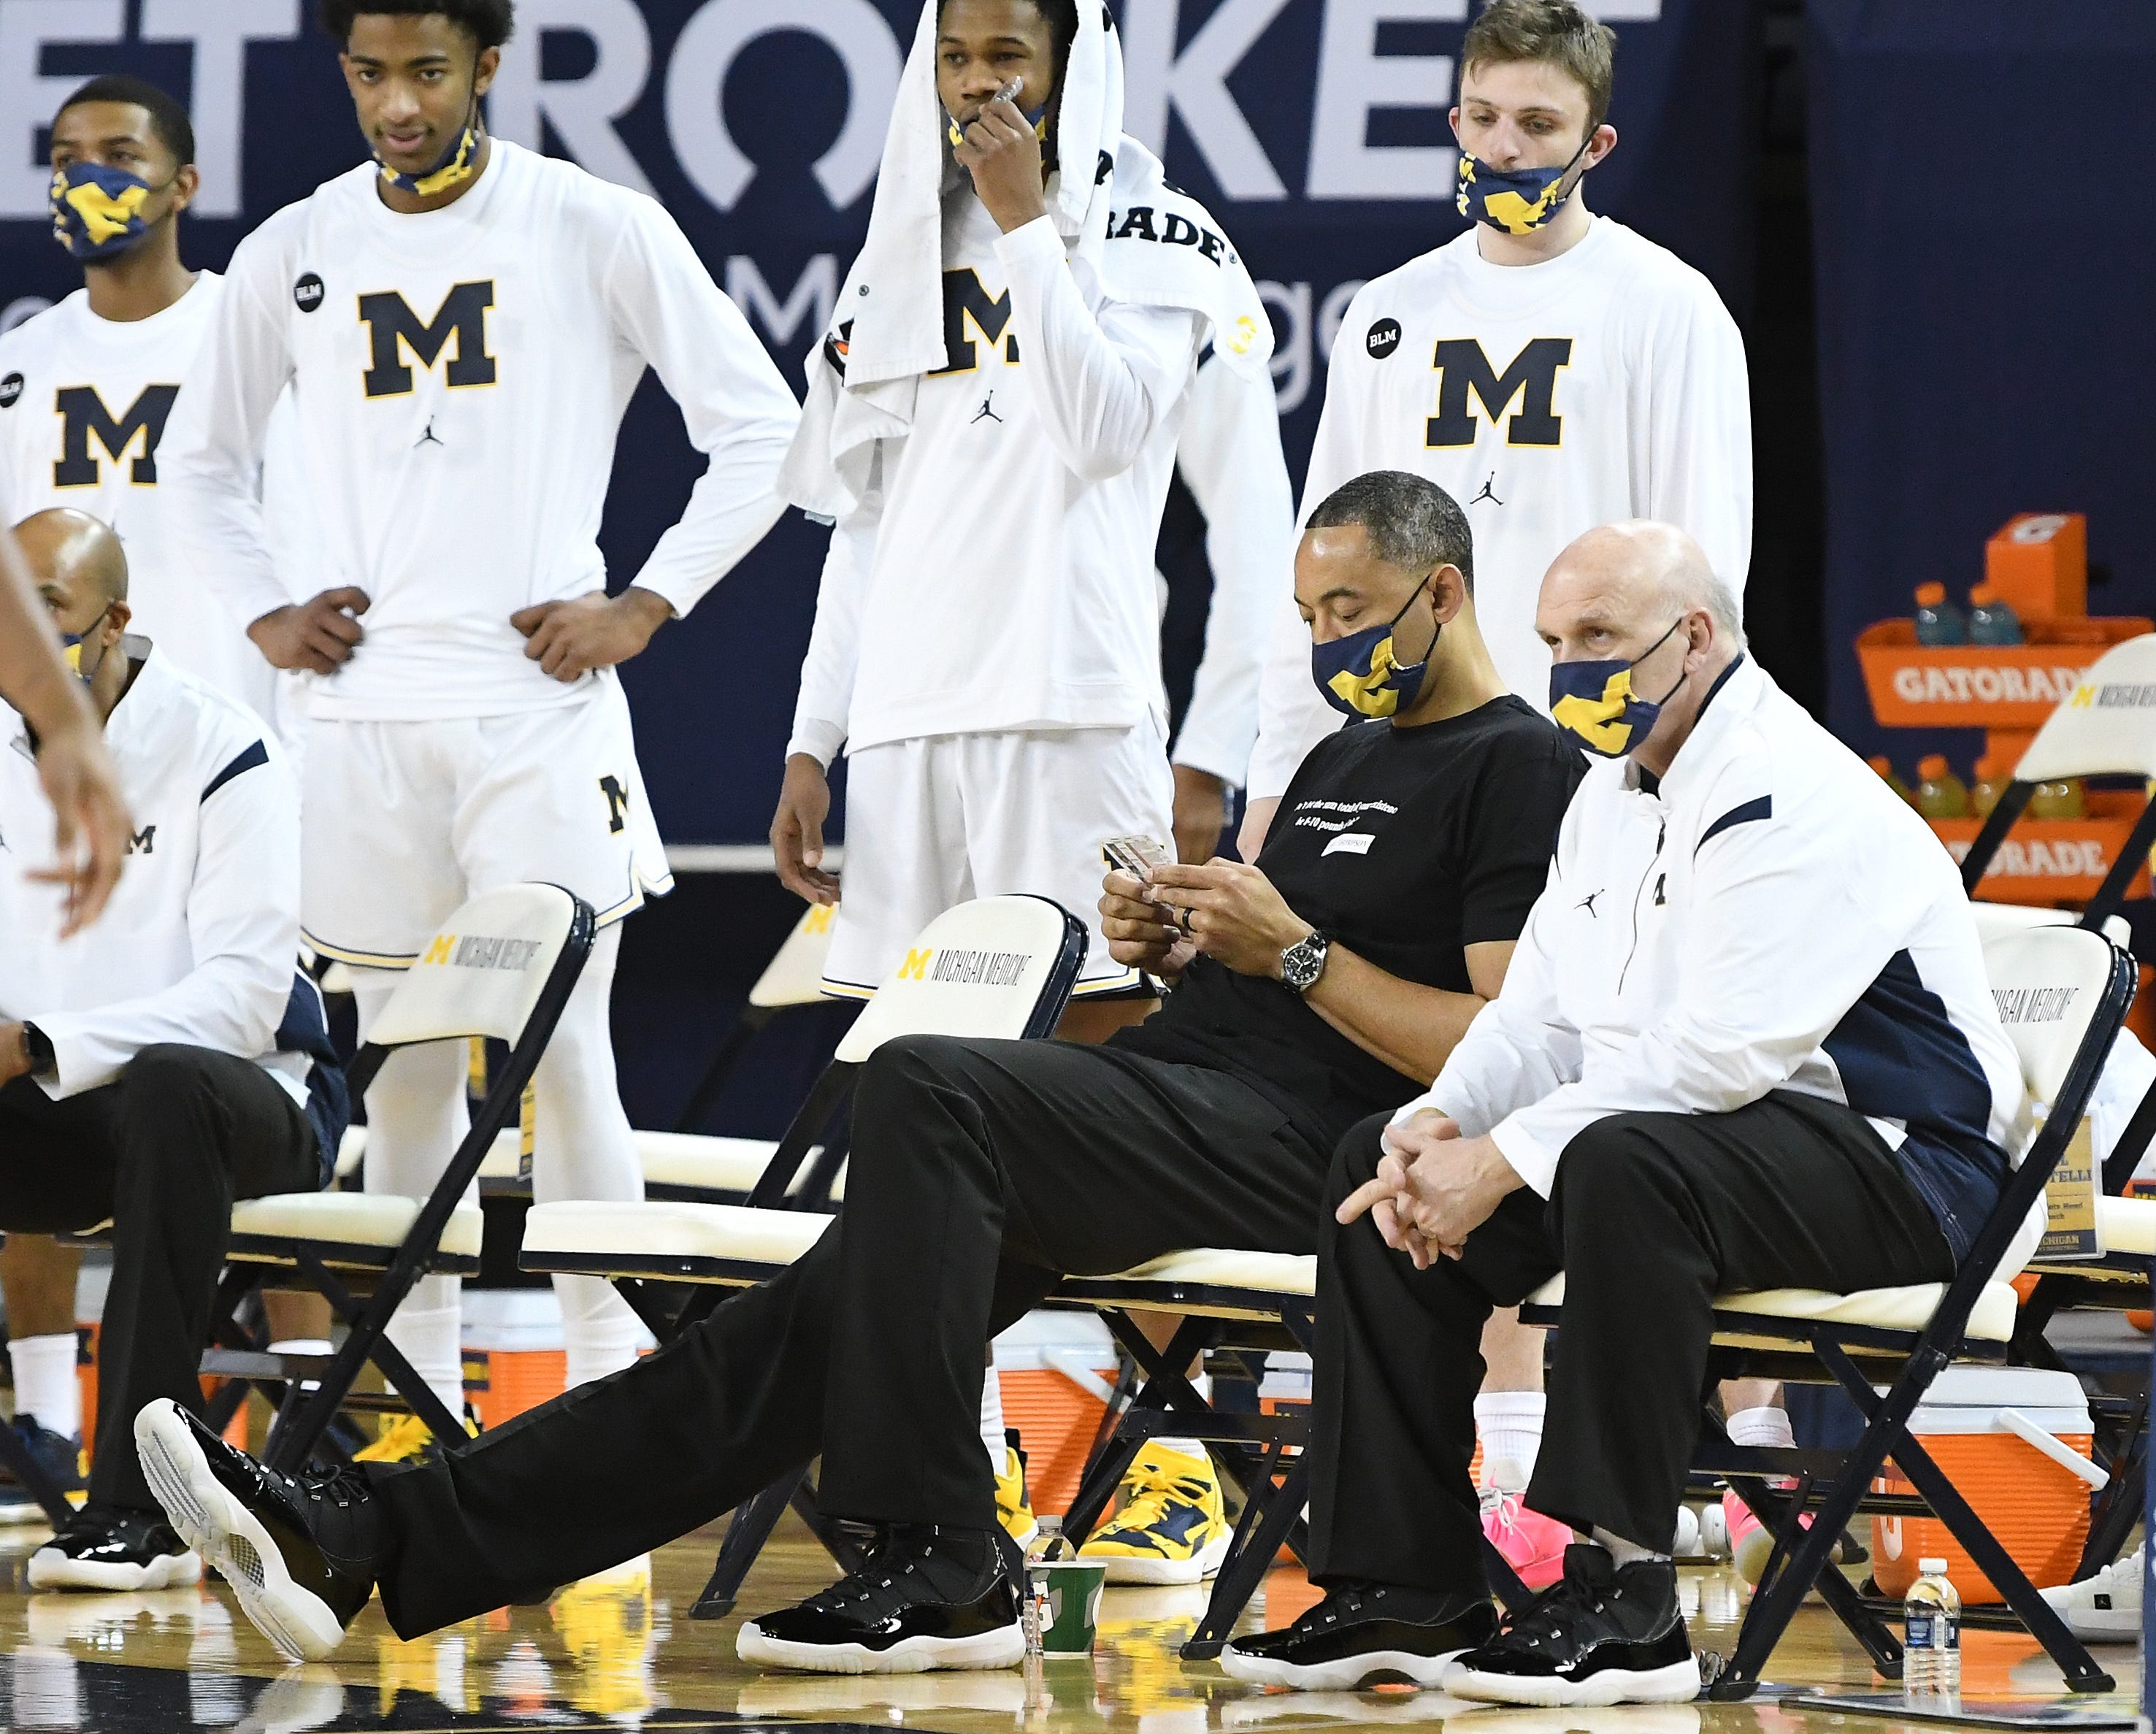 Michigan coach Juwan Howard and assistant coach 
Phil Martelli on the sidelines before the Wolverines take on Illinois at Crisler Center.